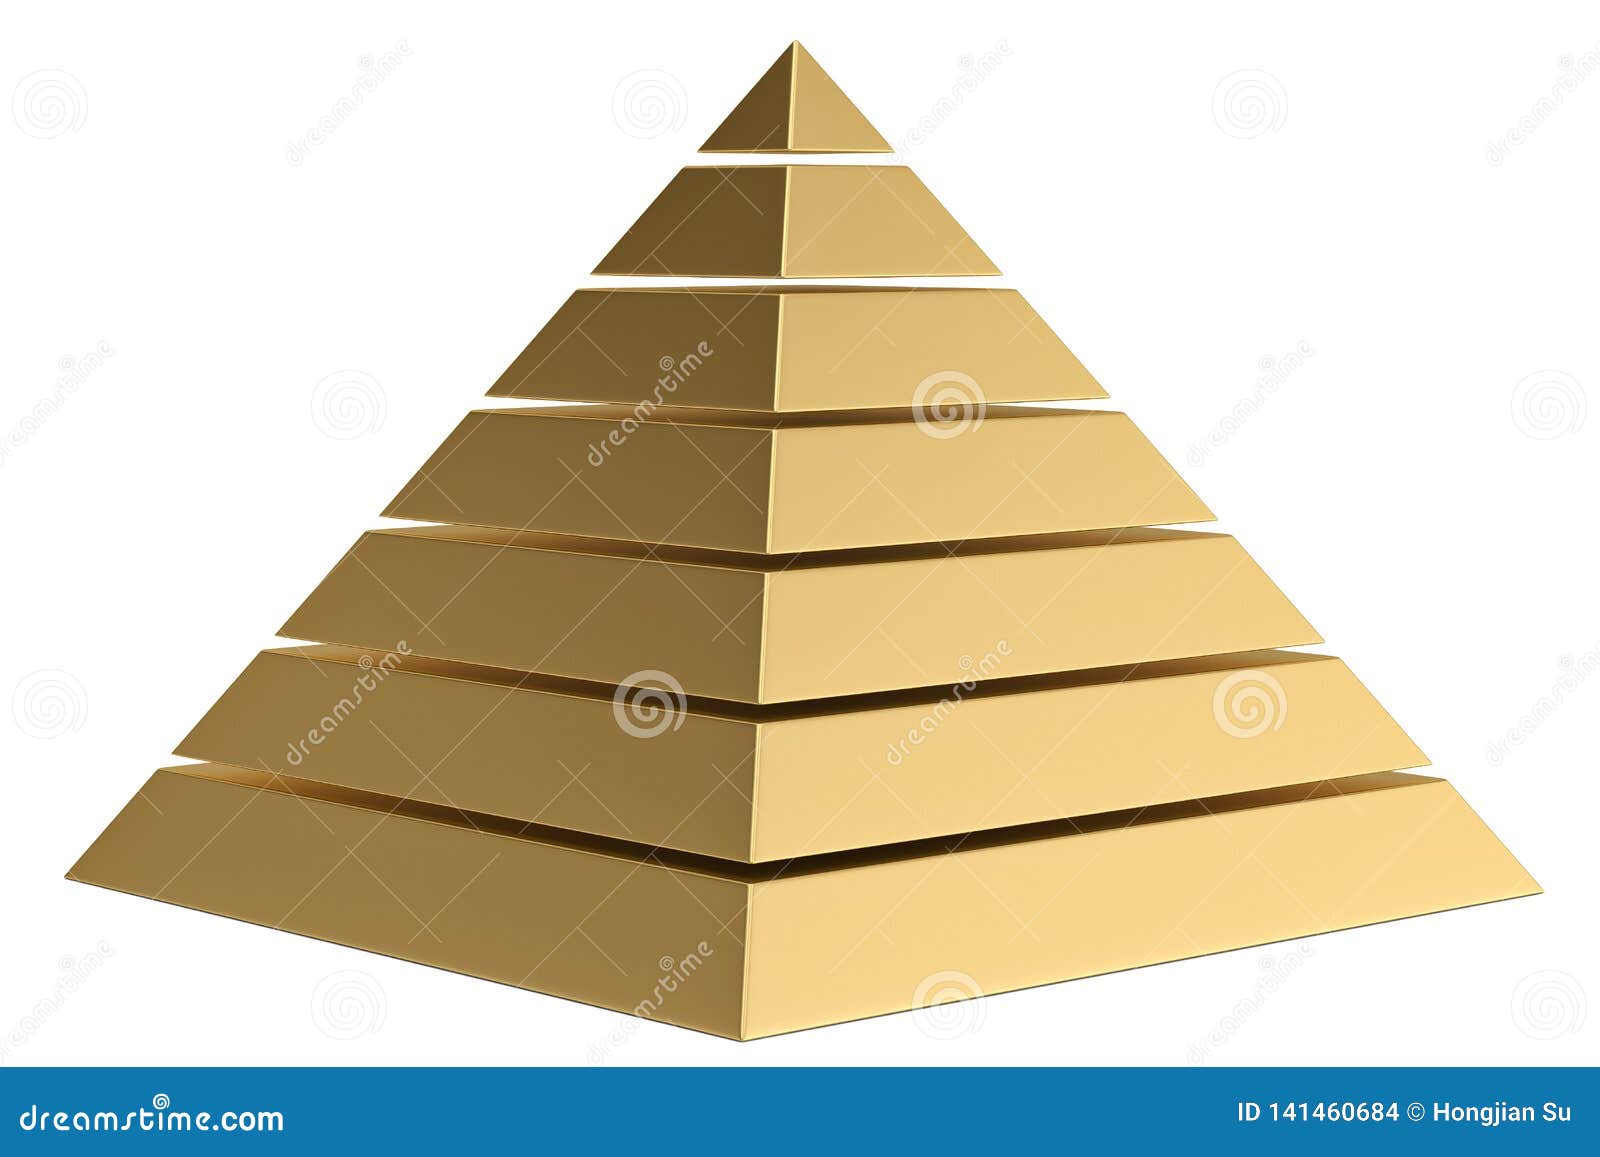 Golden Pyramid Isolated on White Background 3D Illustration Stock ...